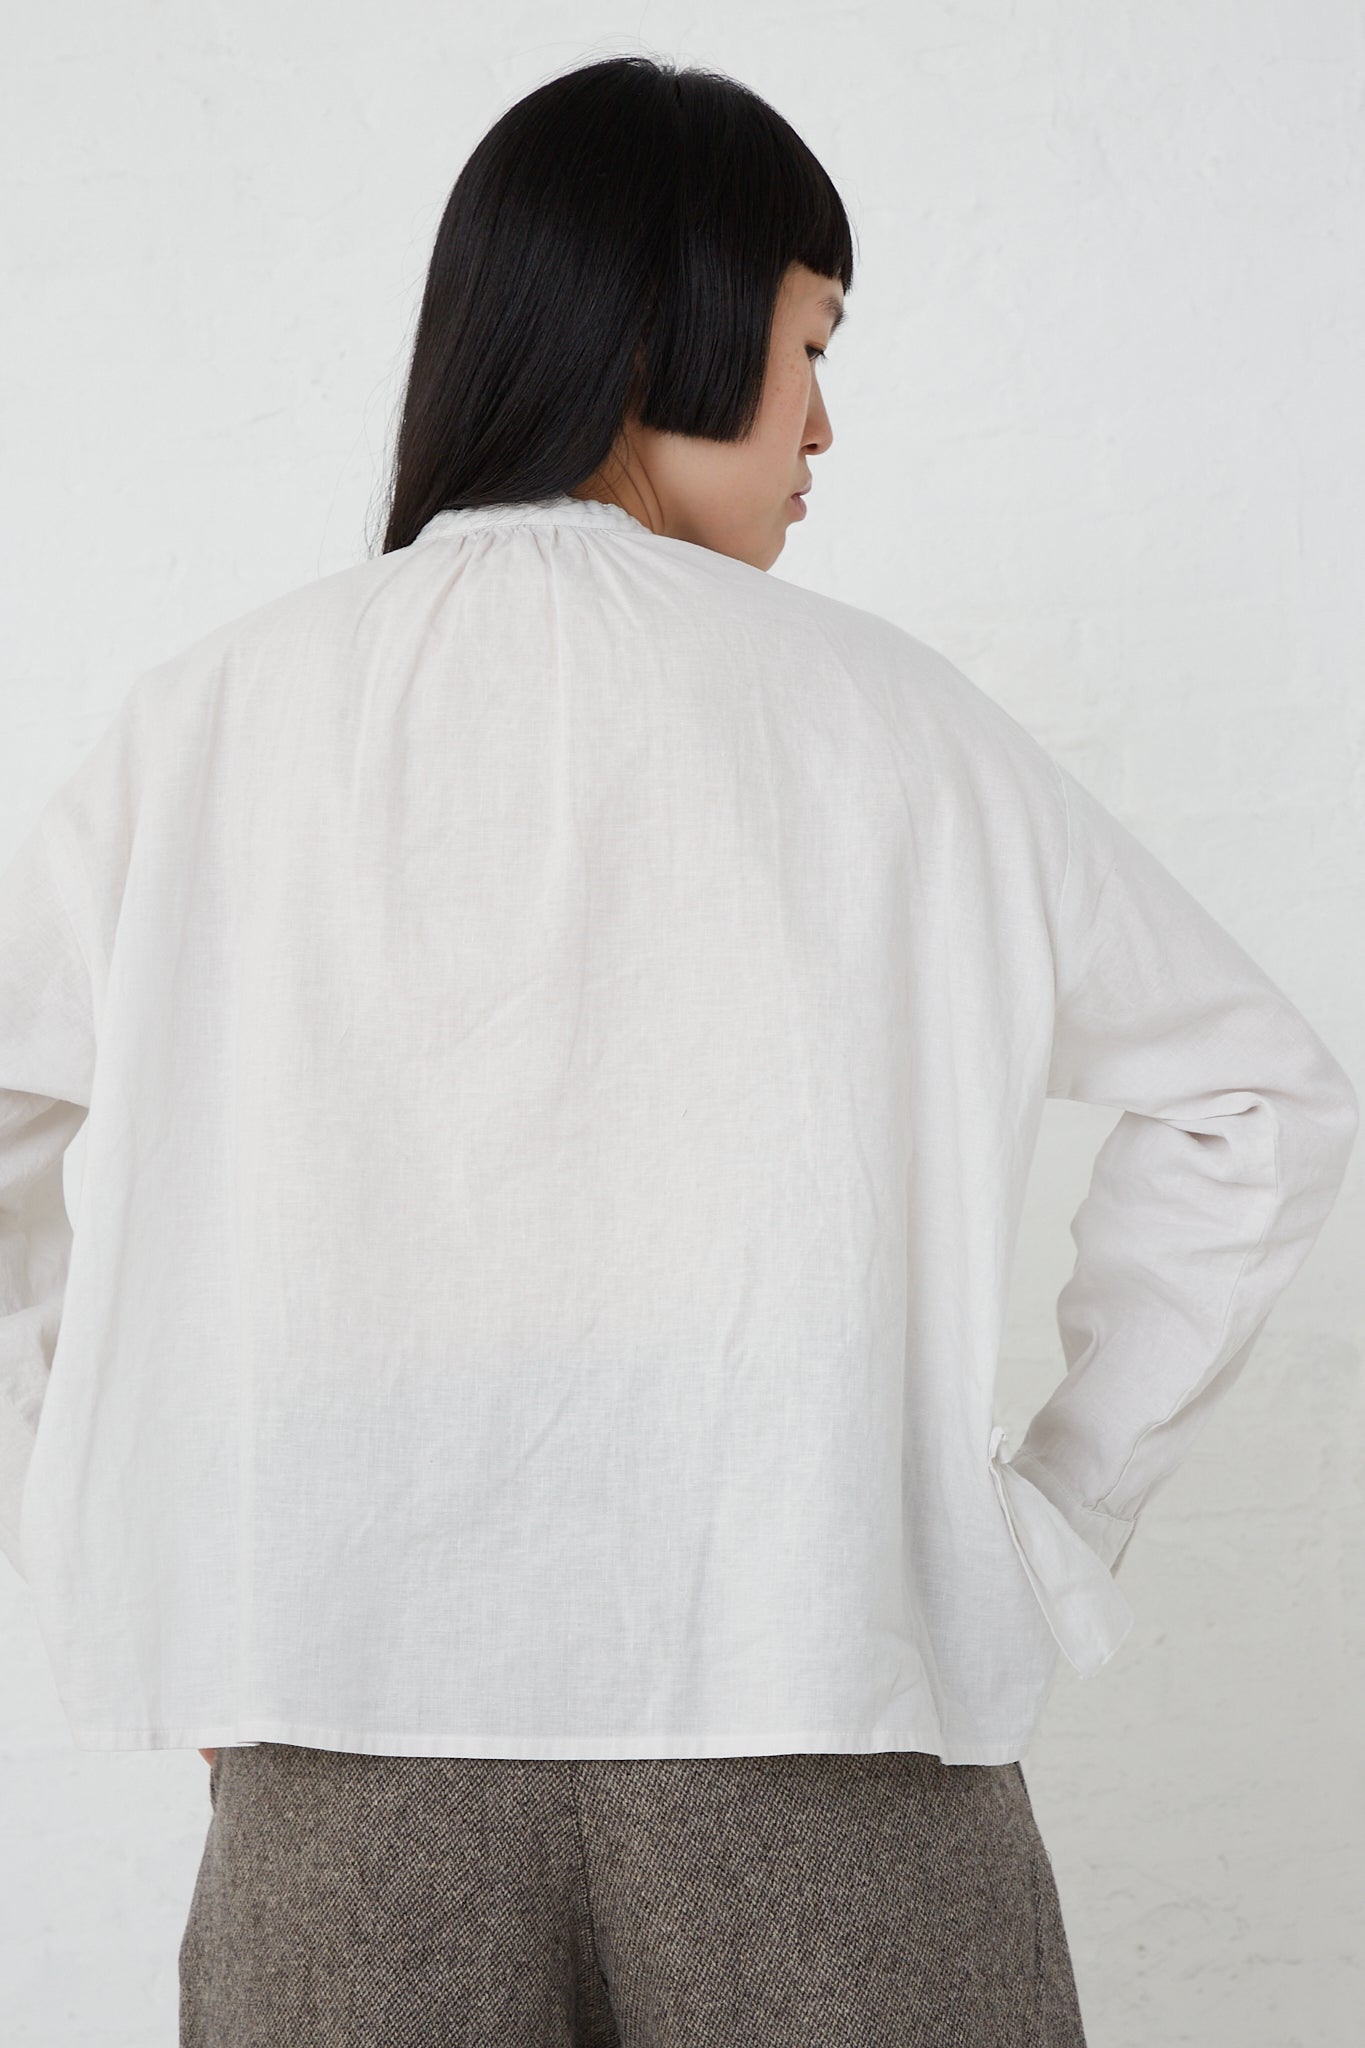 The back view of a woman wearing an UpcycleLino Linen Gathered Frill Blouse in Off White by nest Robe with a front button closure.